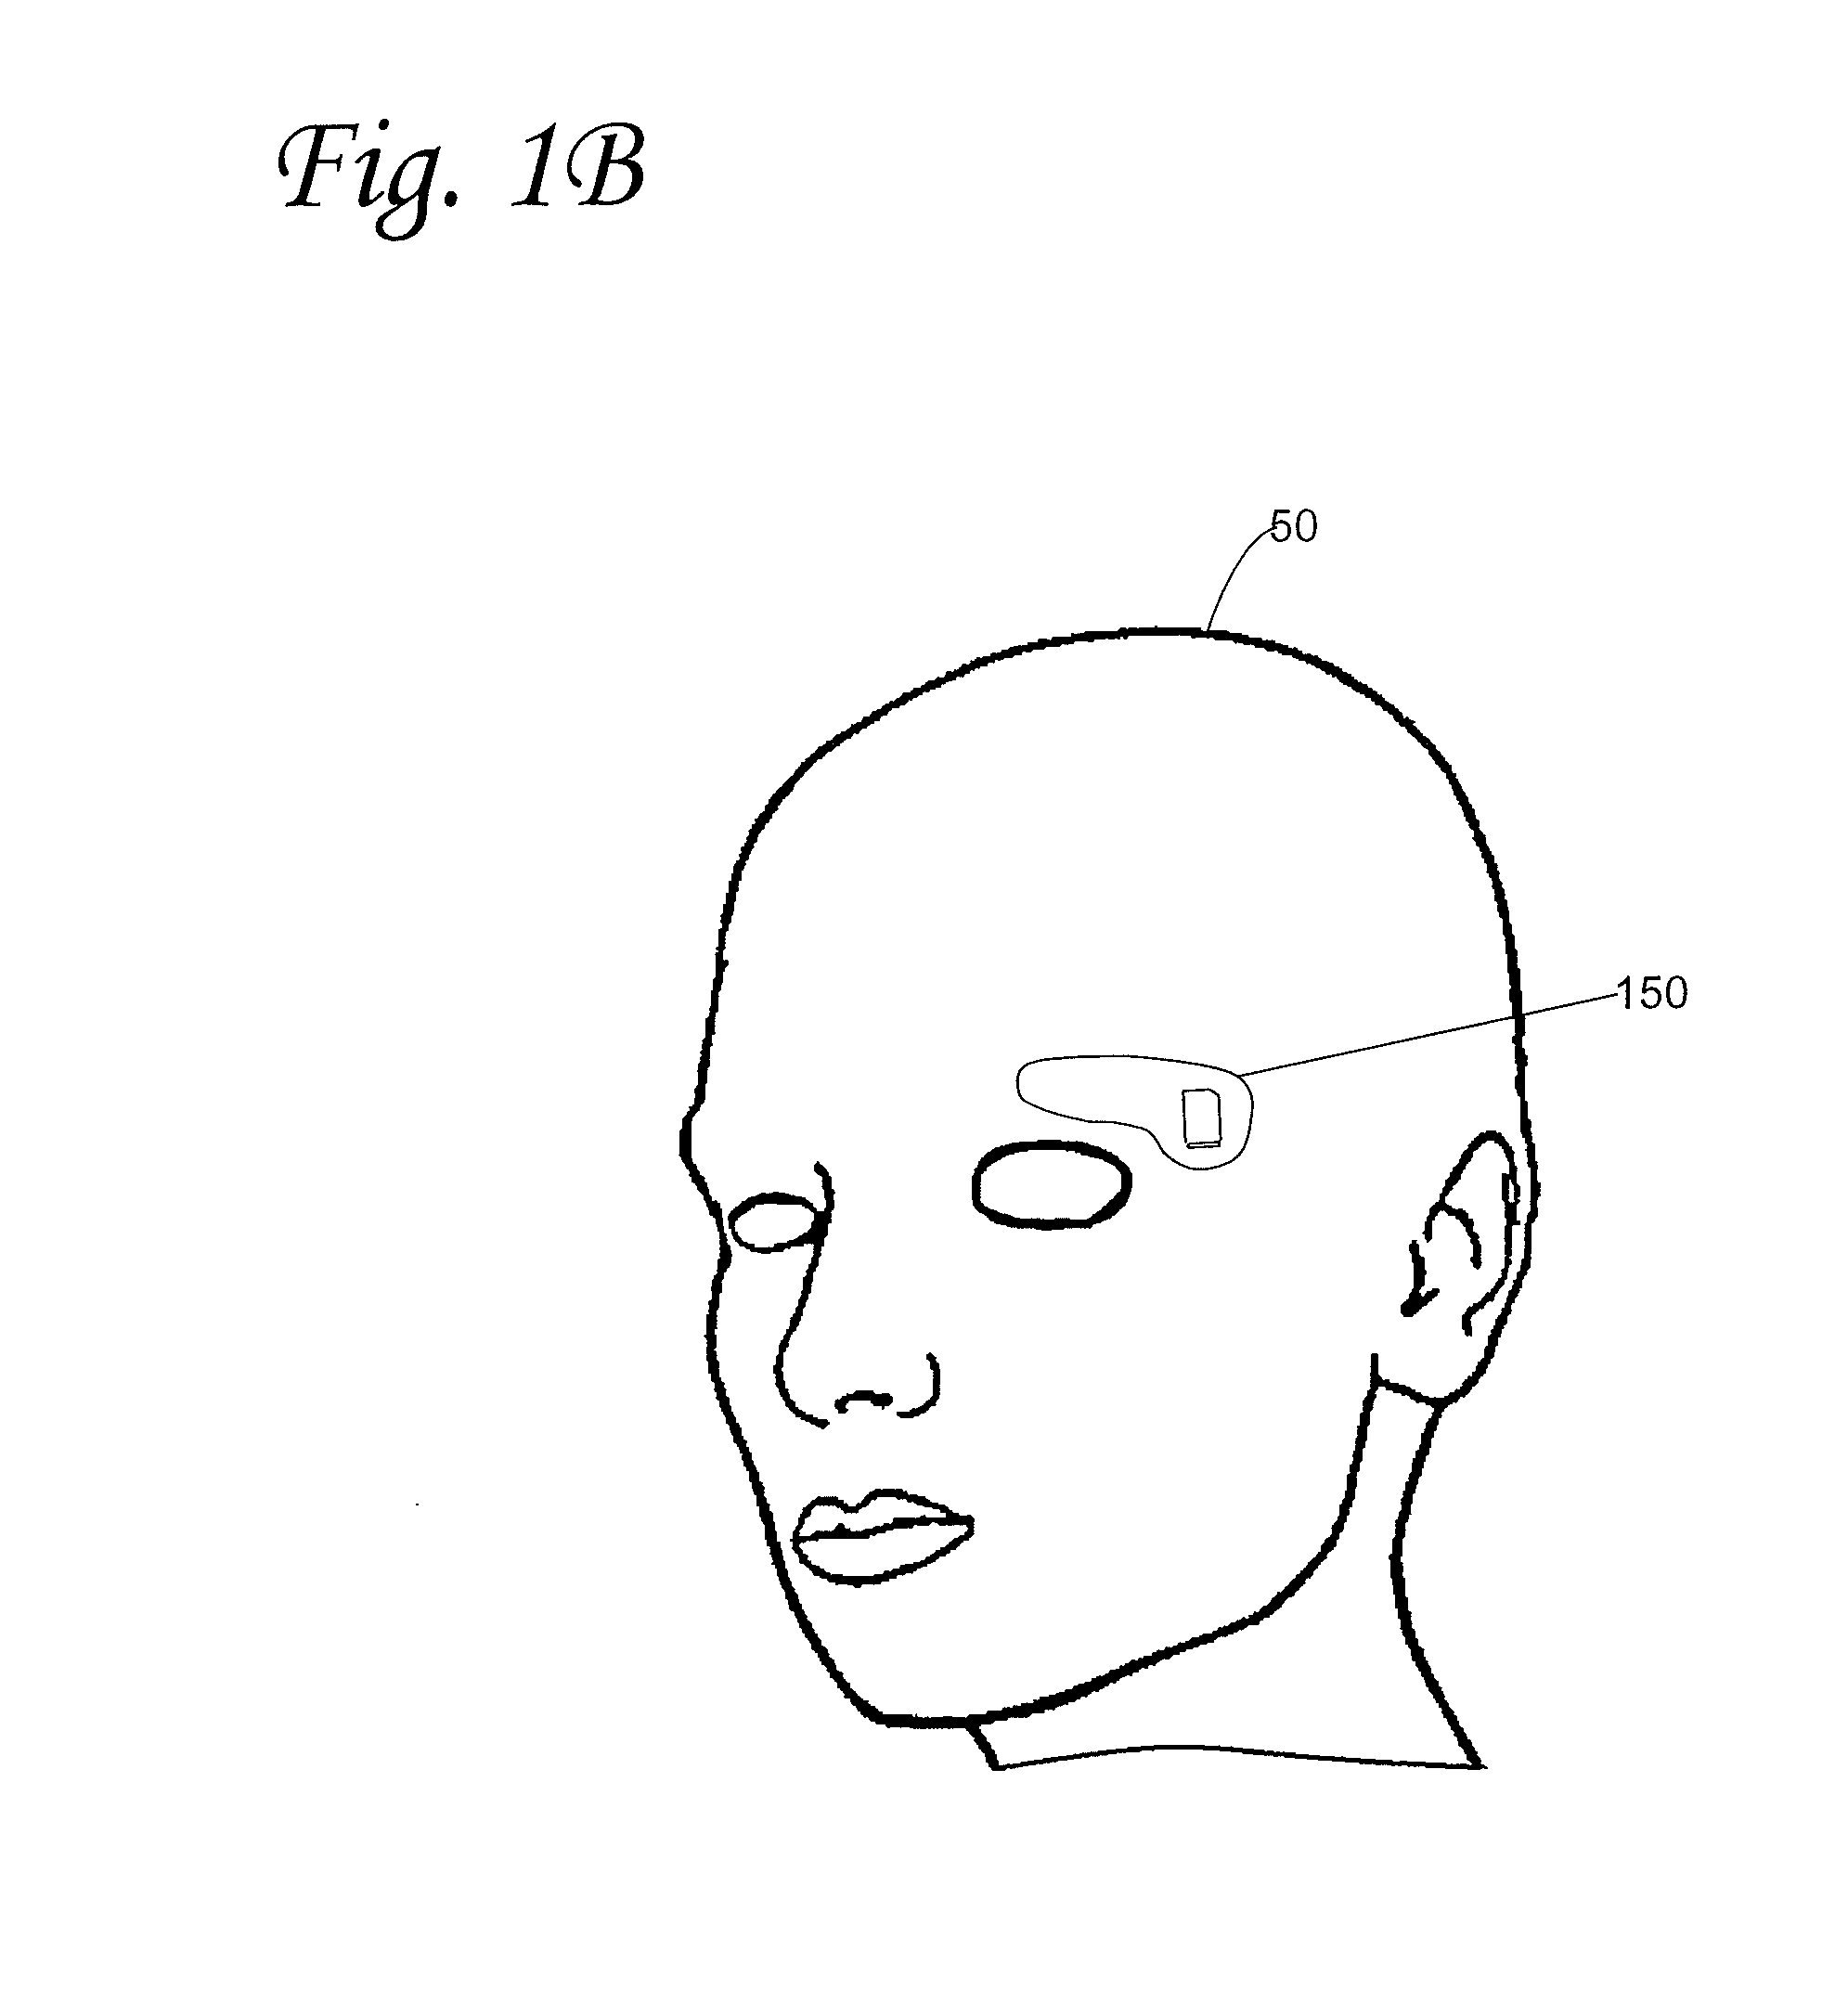 Systems, devices, and methods for monitoring a subject